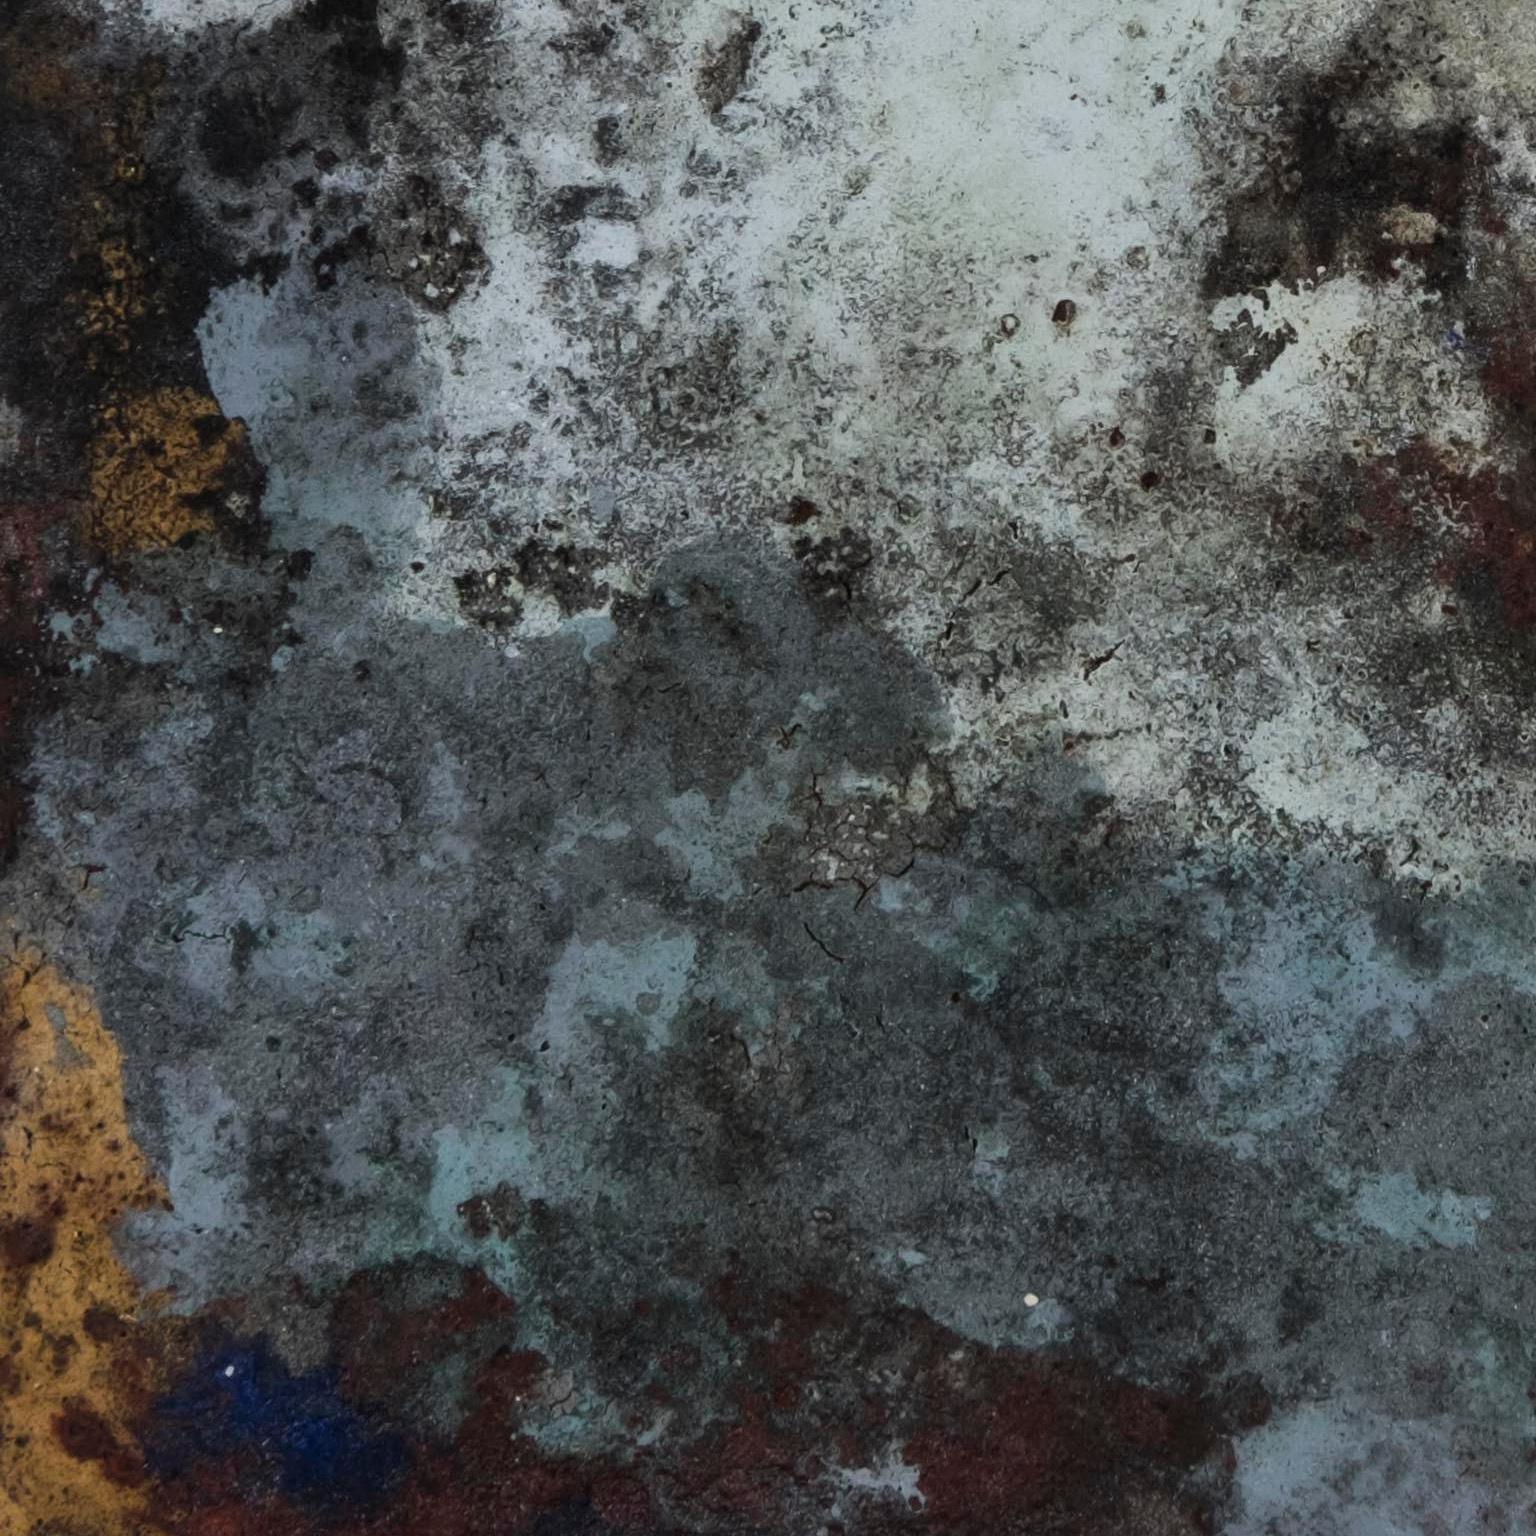 Terra Bruciata #18 (Scorched Earth) - Abstract Blue, Grey, and Yellow Painting 2